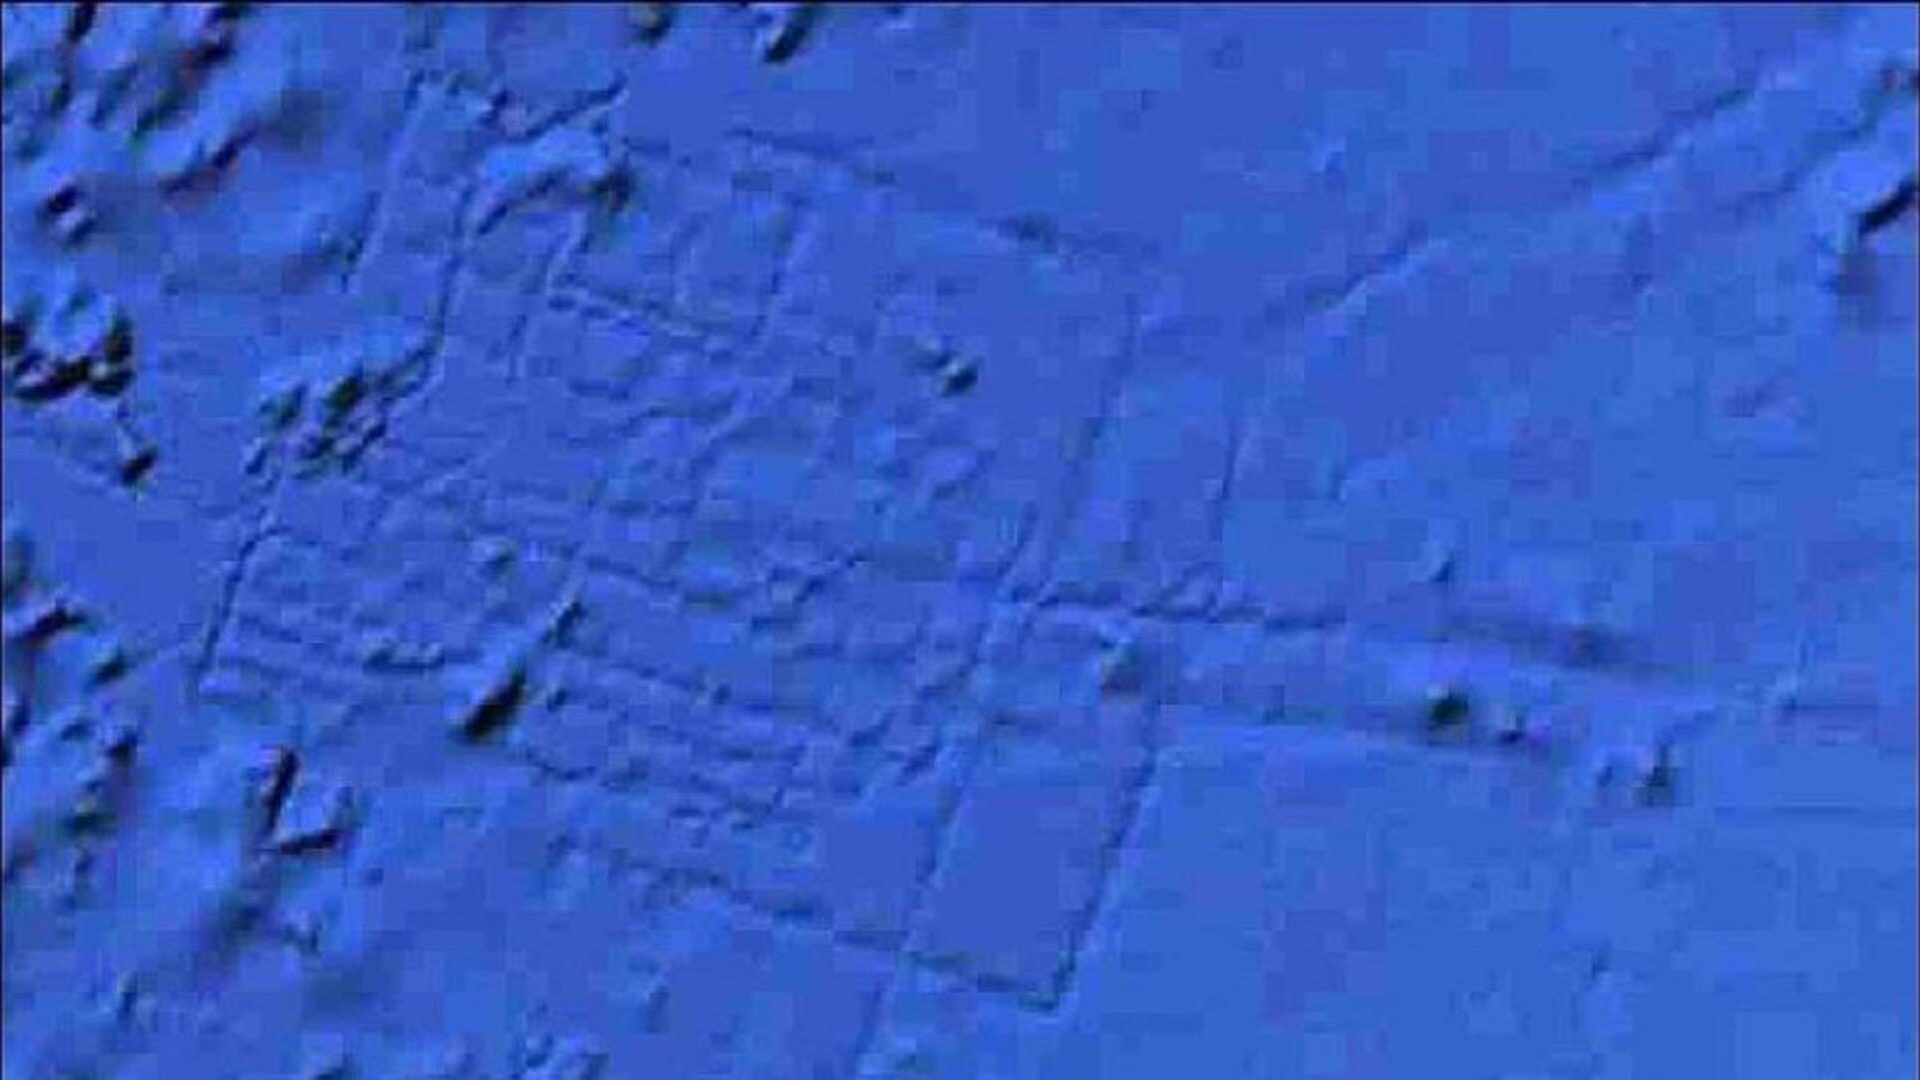 <p>Using this image from Google Ocean (marine equivalent of Google Earth), The Sun newspaper claimed in 2009 that those lines were the ruins of human constructions, proof of Atlantis’ existence.</p> <p>Image: Google Ocean</p>